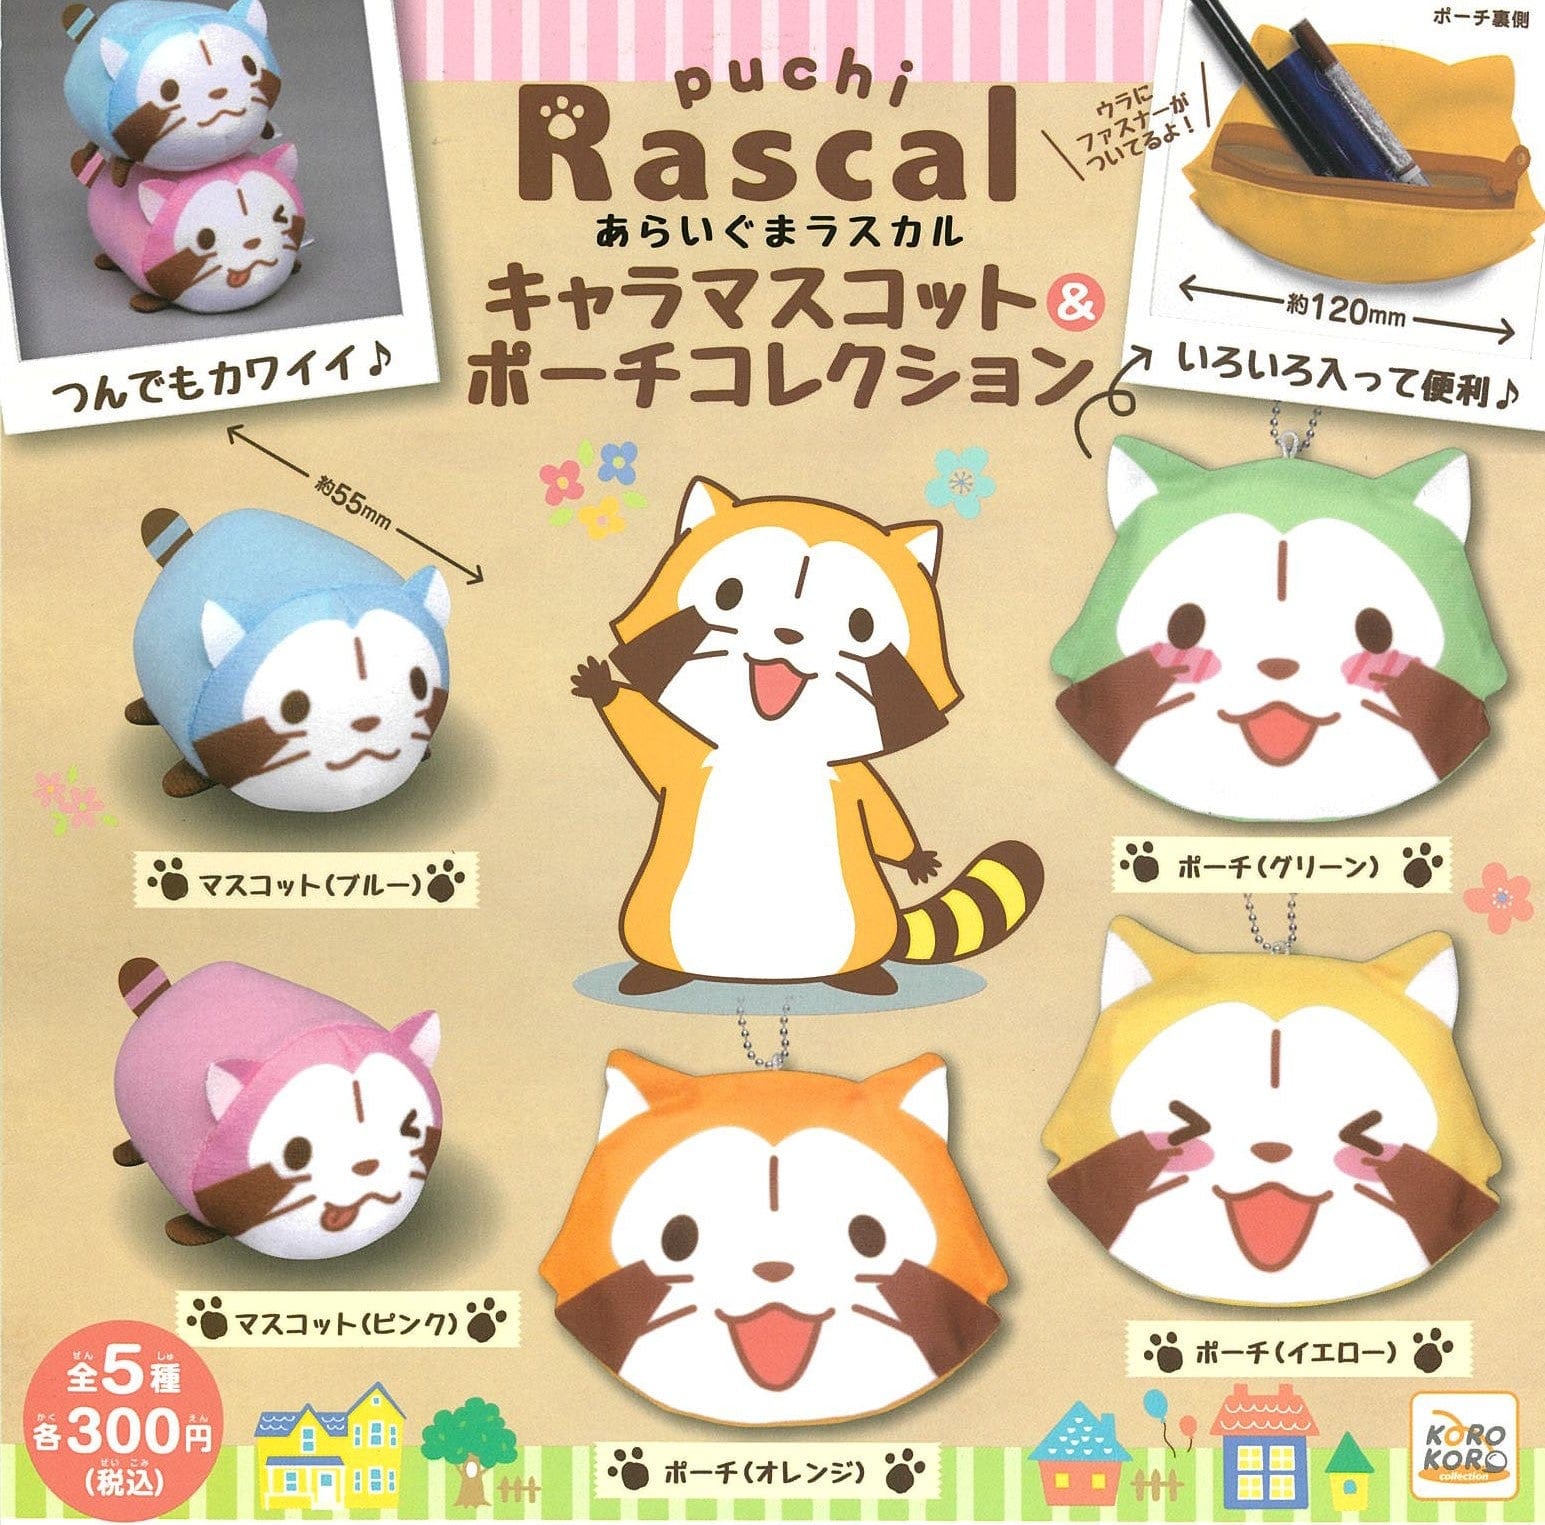 KoroKoro Collection CP0146 - Rascal The Raccoon Chara Mascot & Pouch Collection - Complete Set